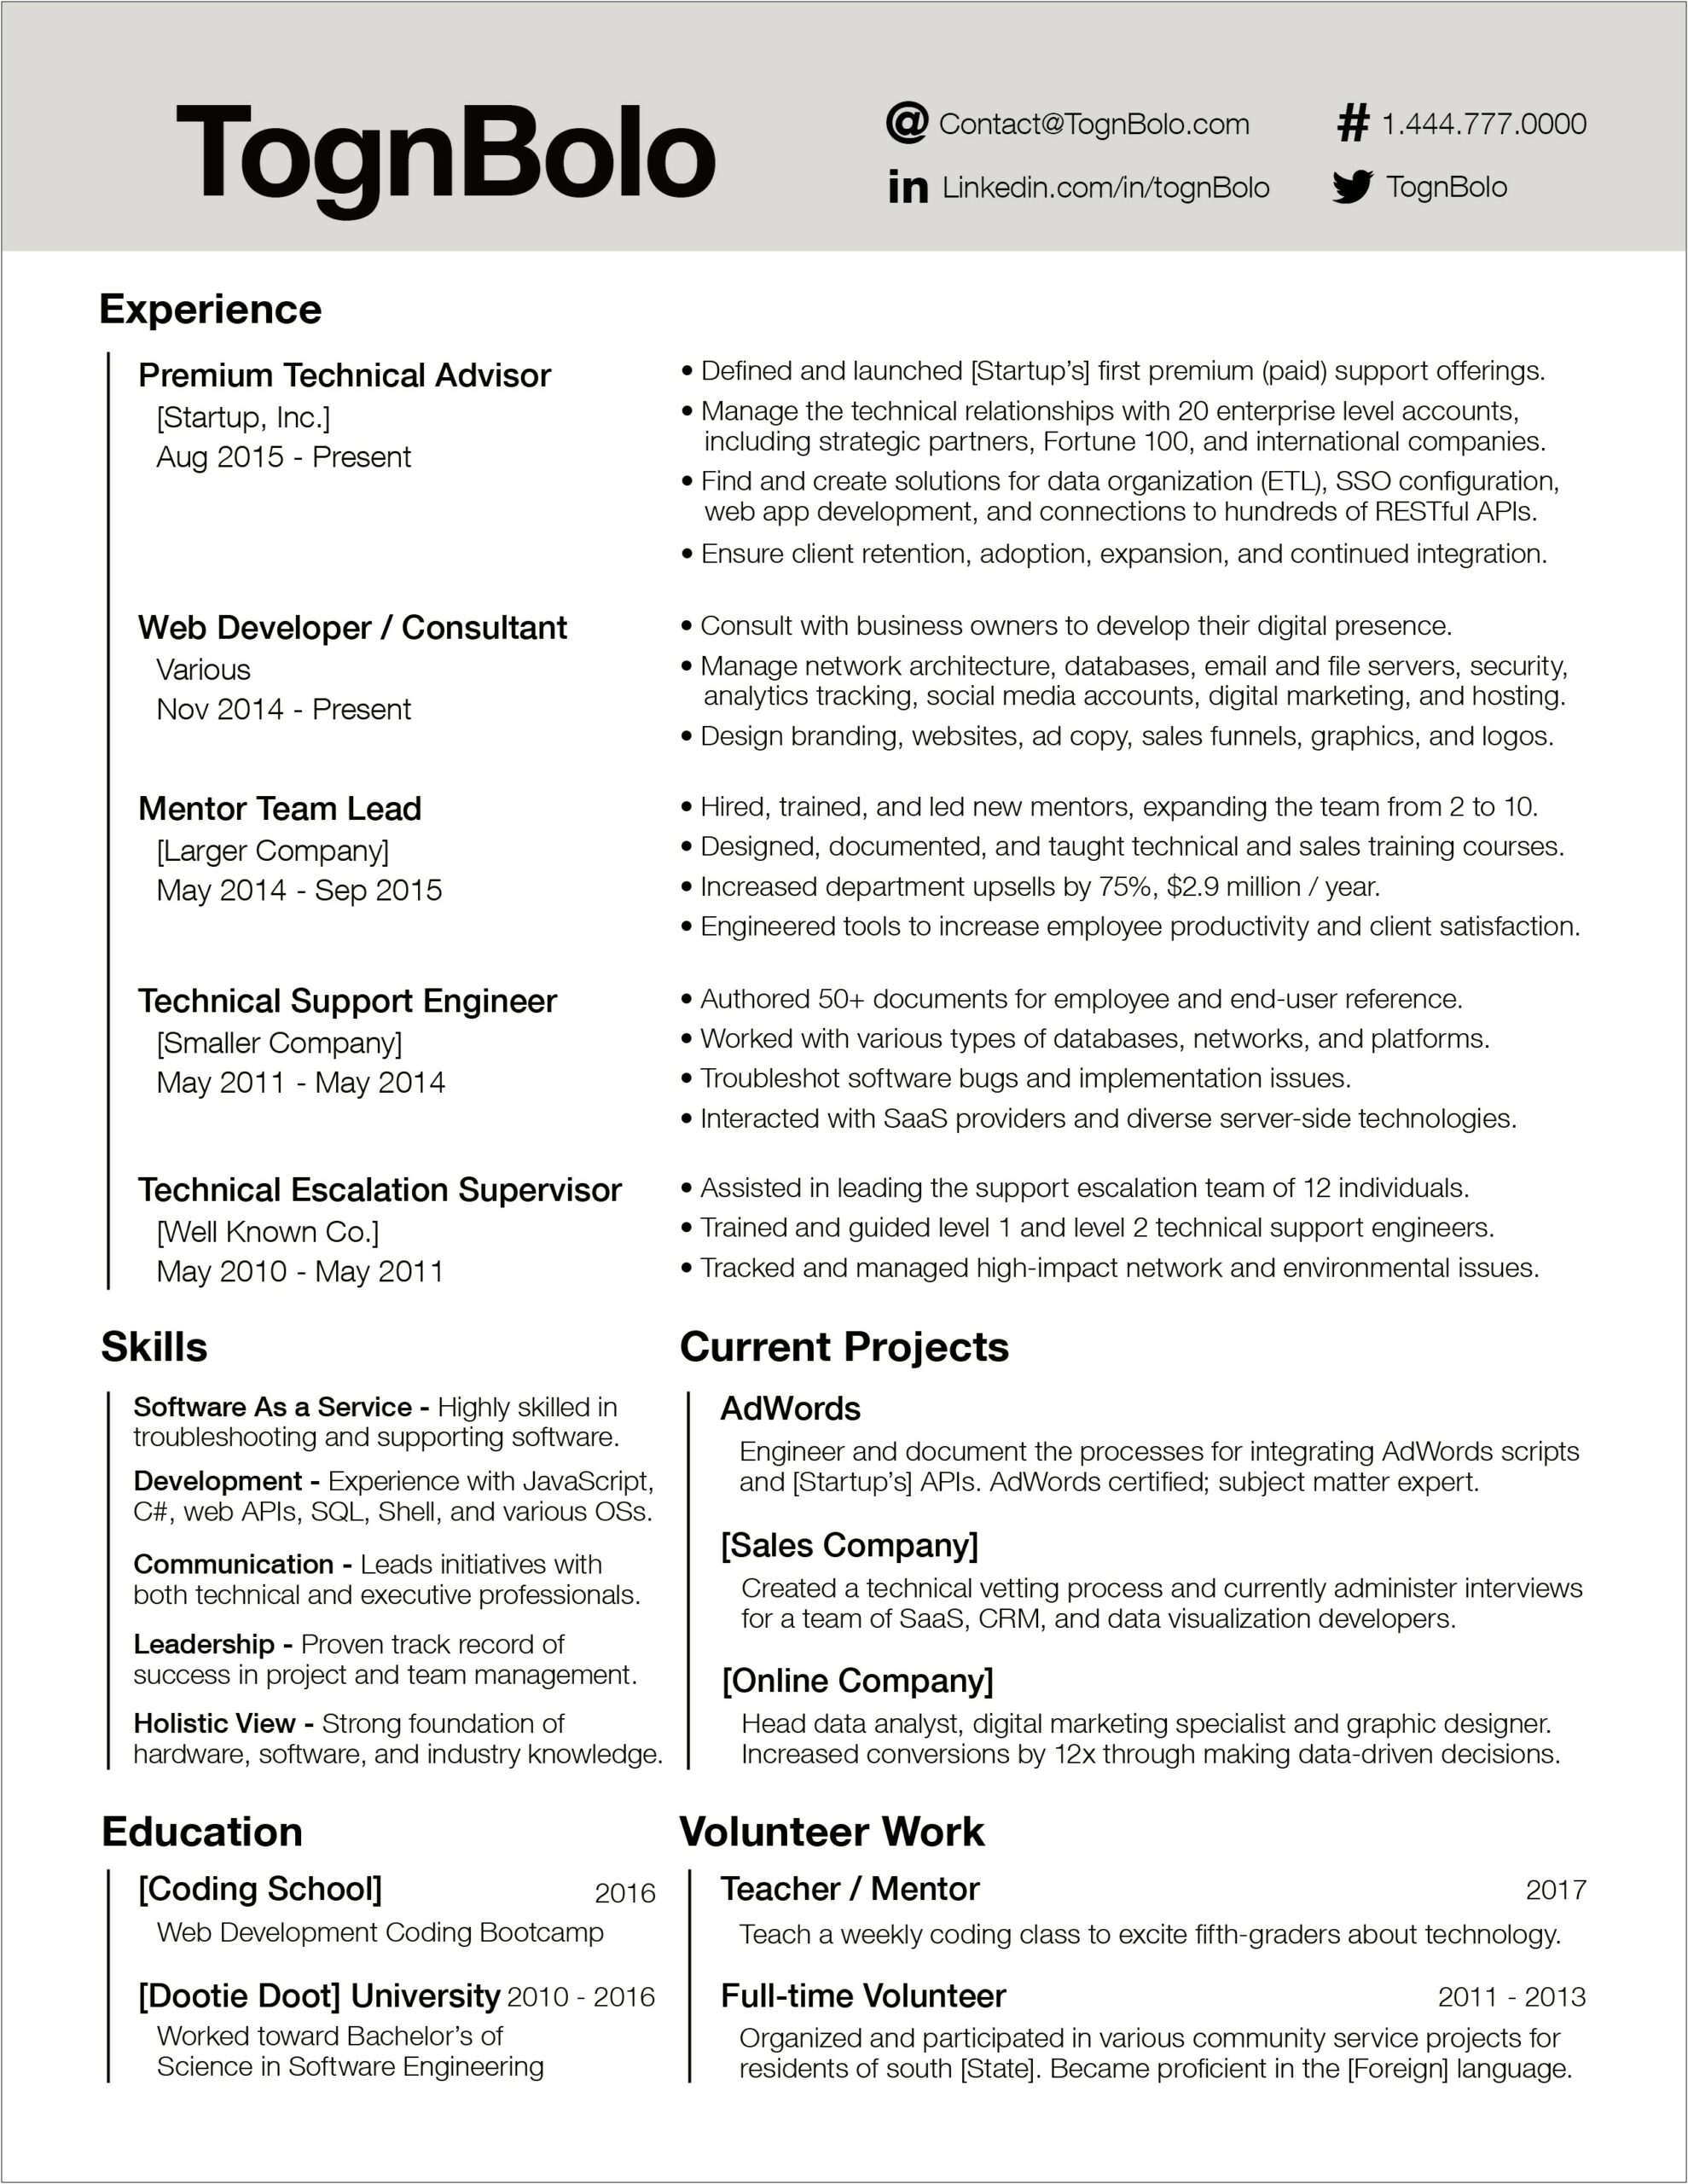 Compare Job Listing With Resume Reddit